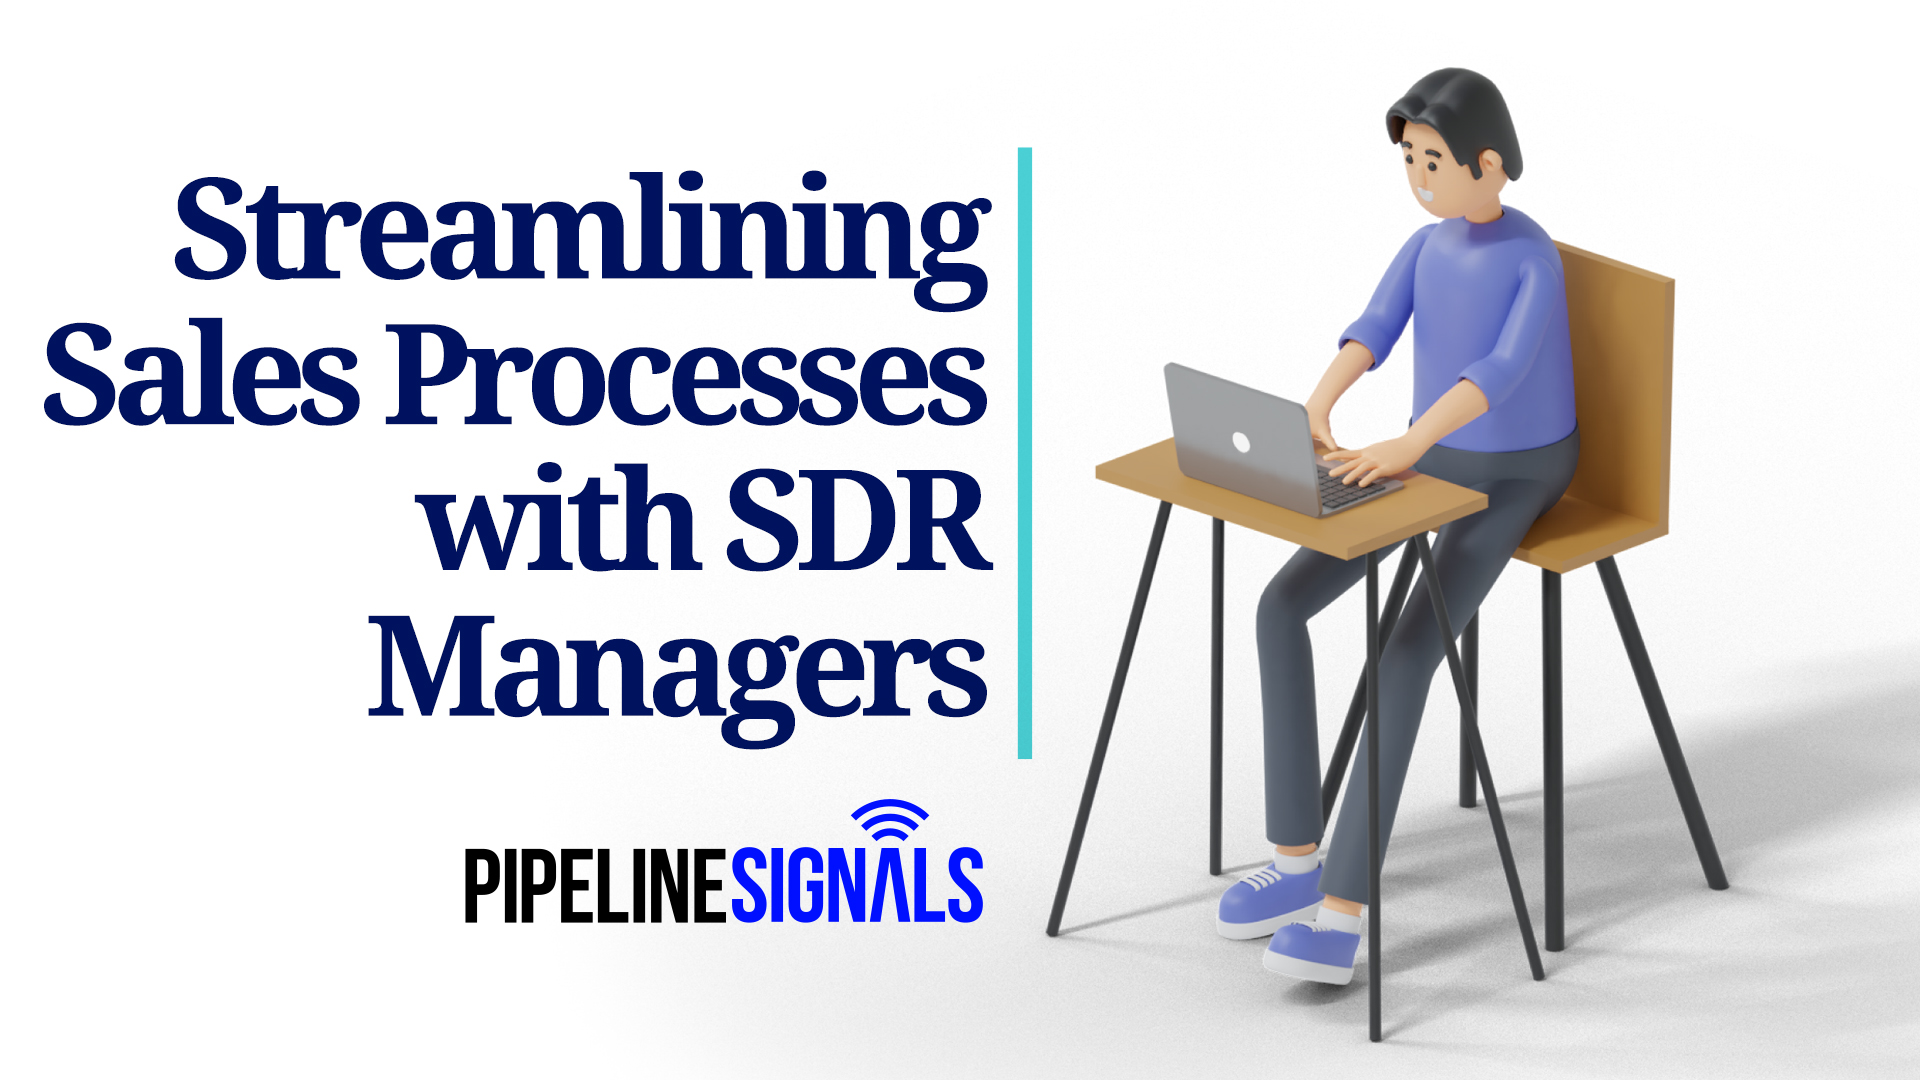 streamlining sales processes with SDR managers